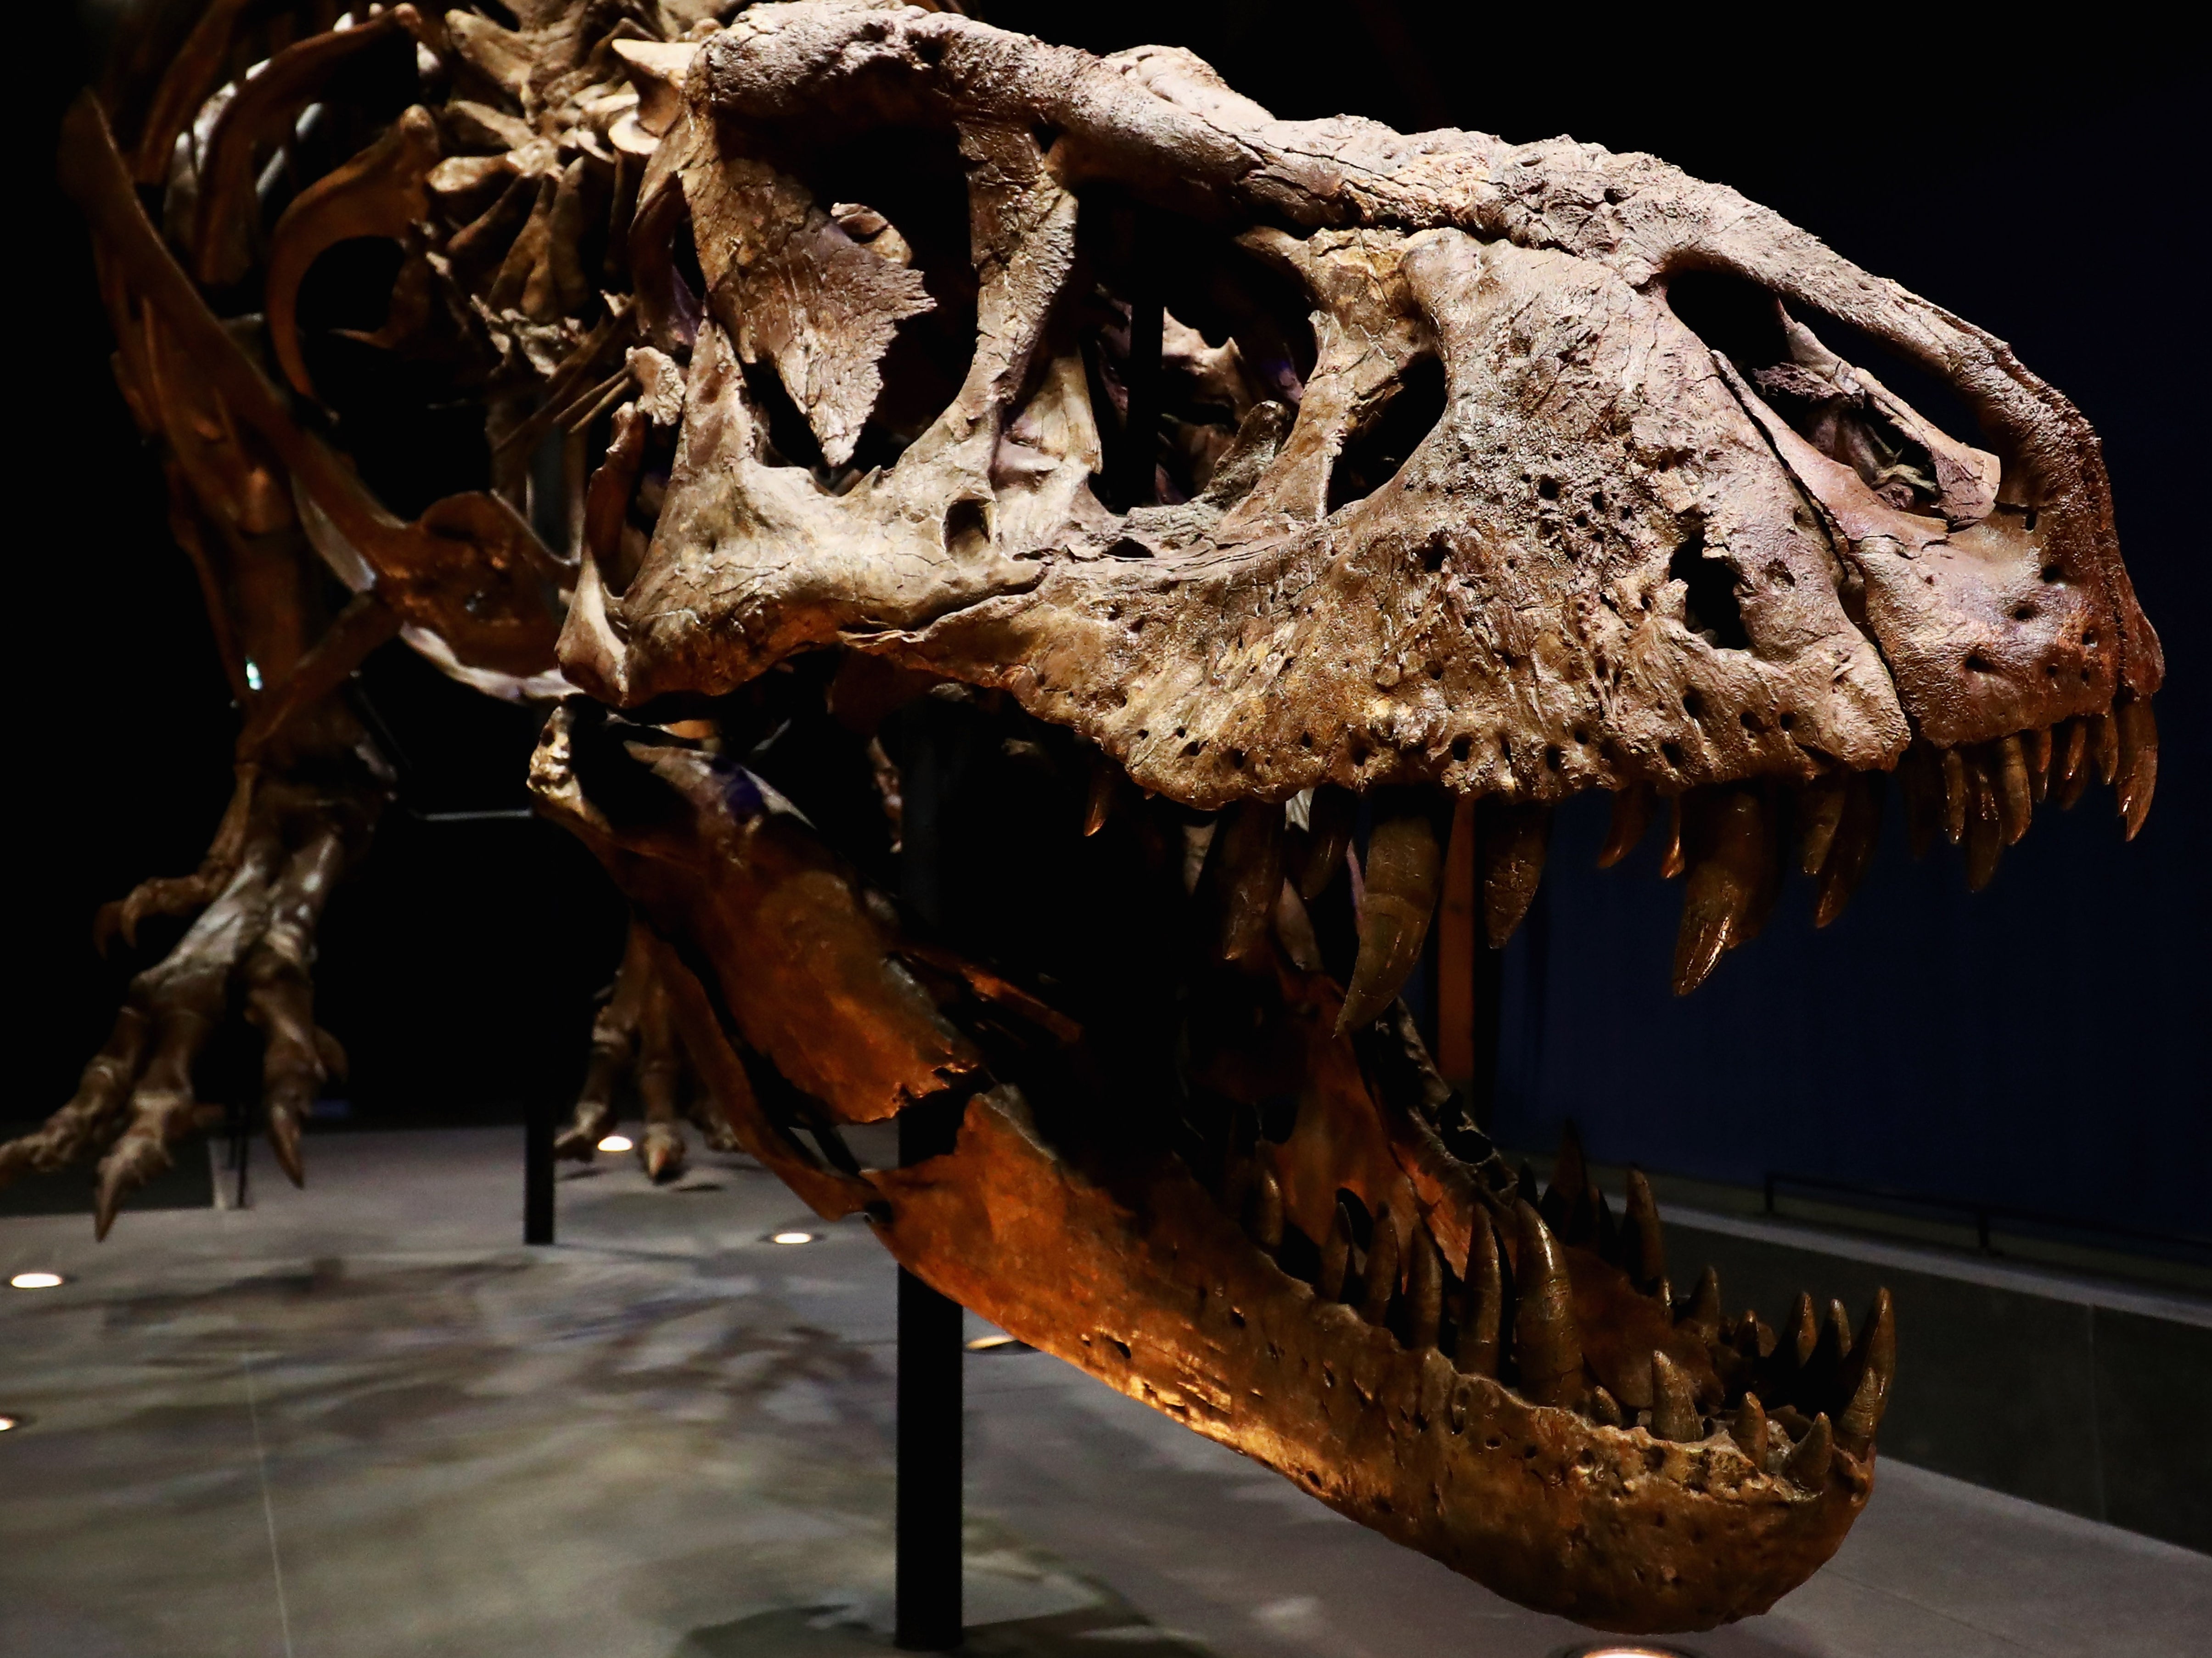 The skeleton of a Tyrannosaurus rex unearthed in Montana in 2013 and on display at the Natural History Museum of Leiden in the Netherlands